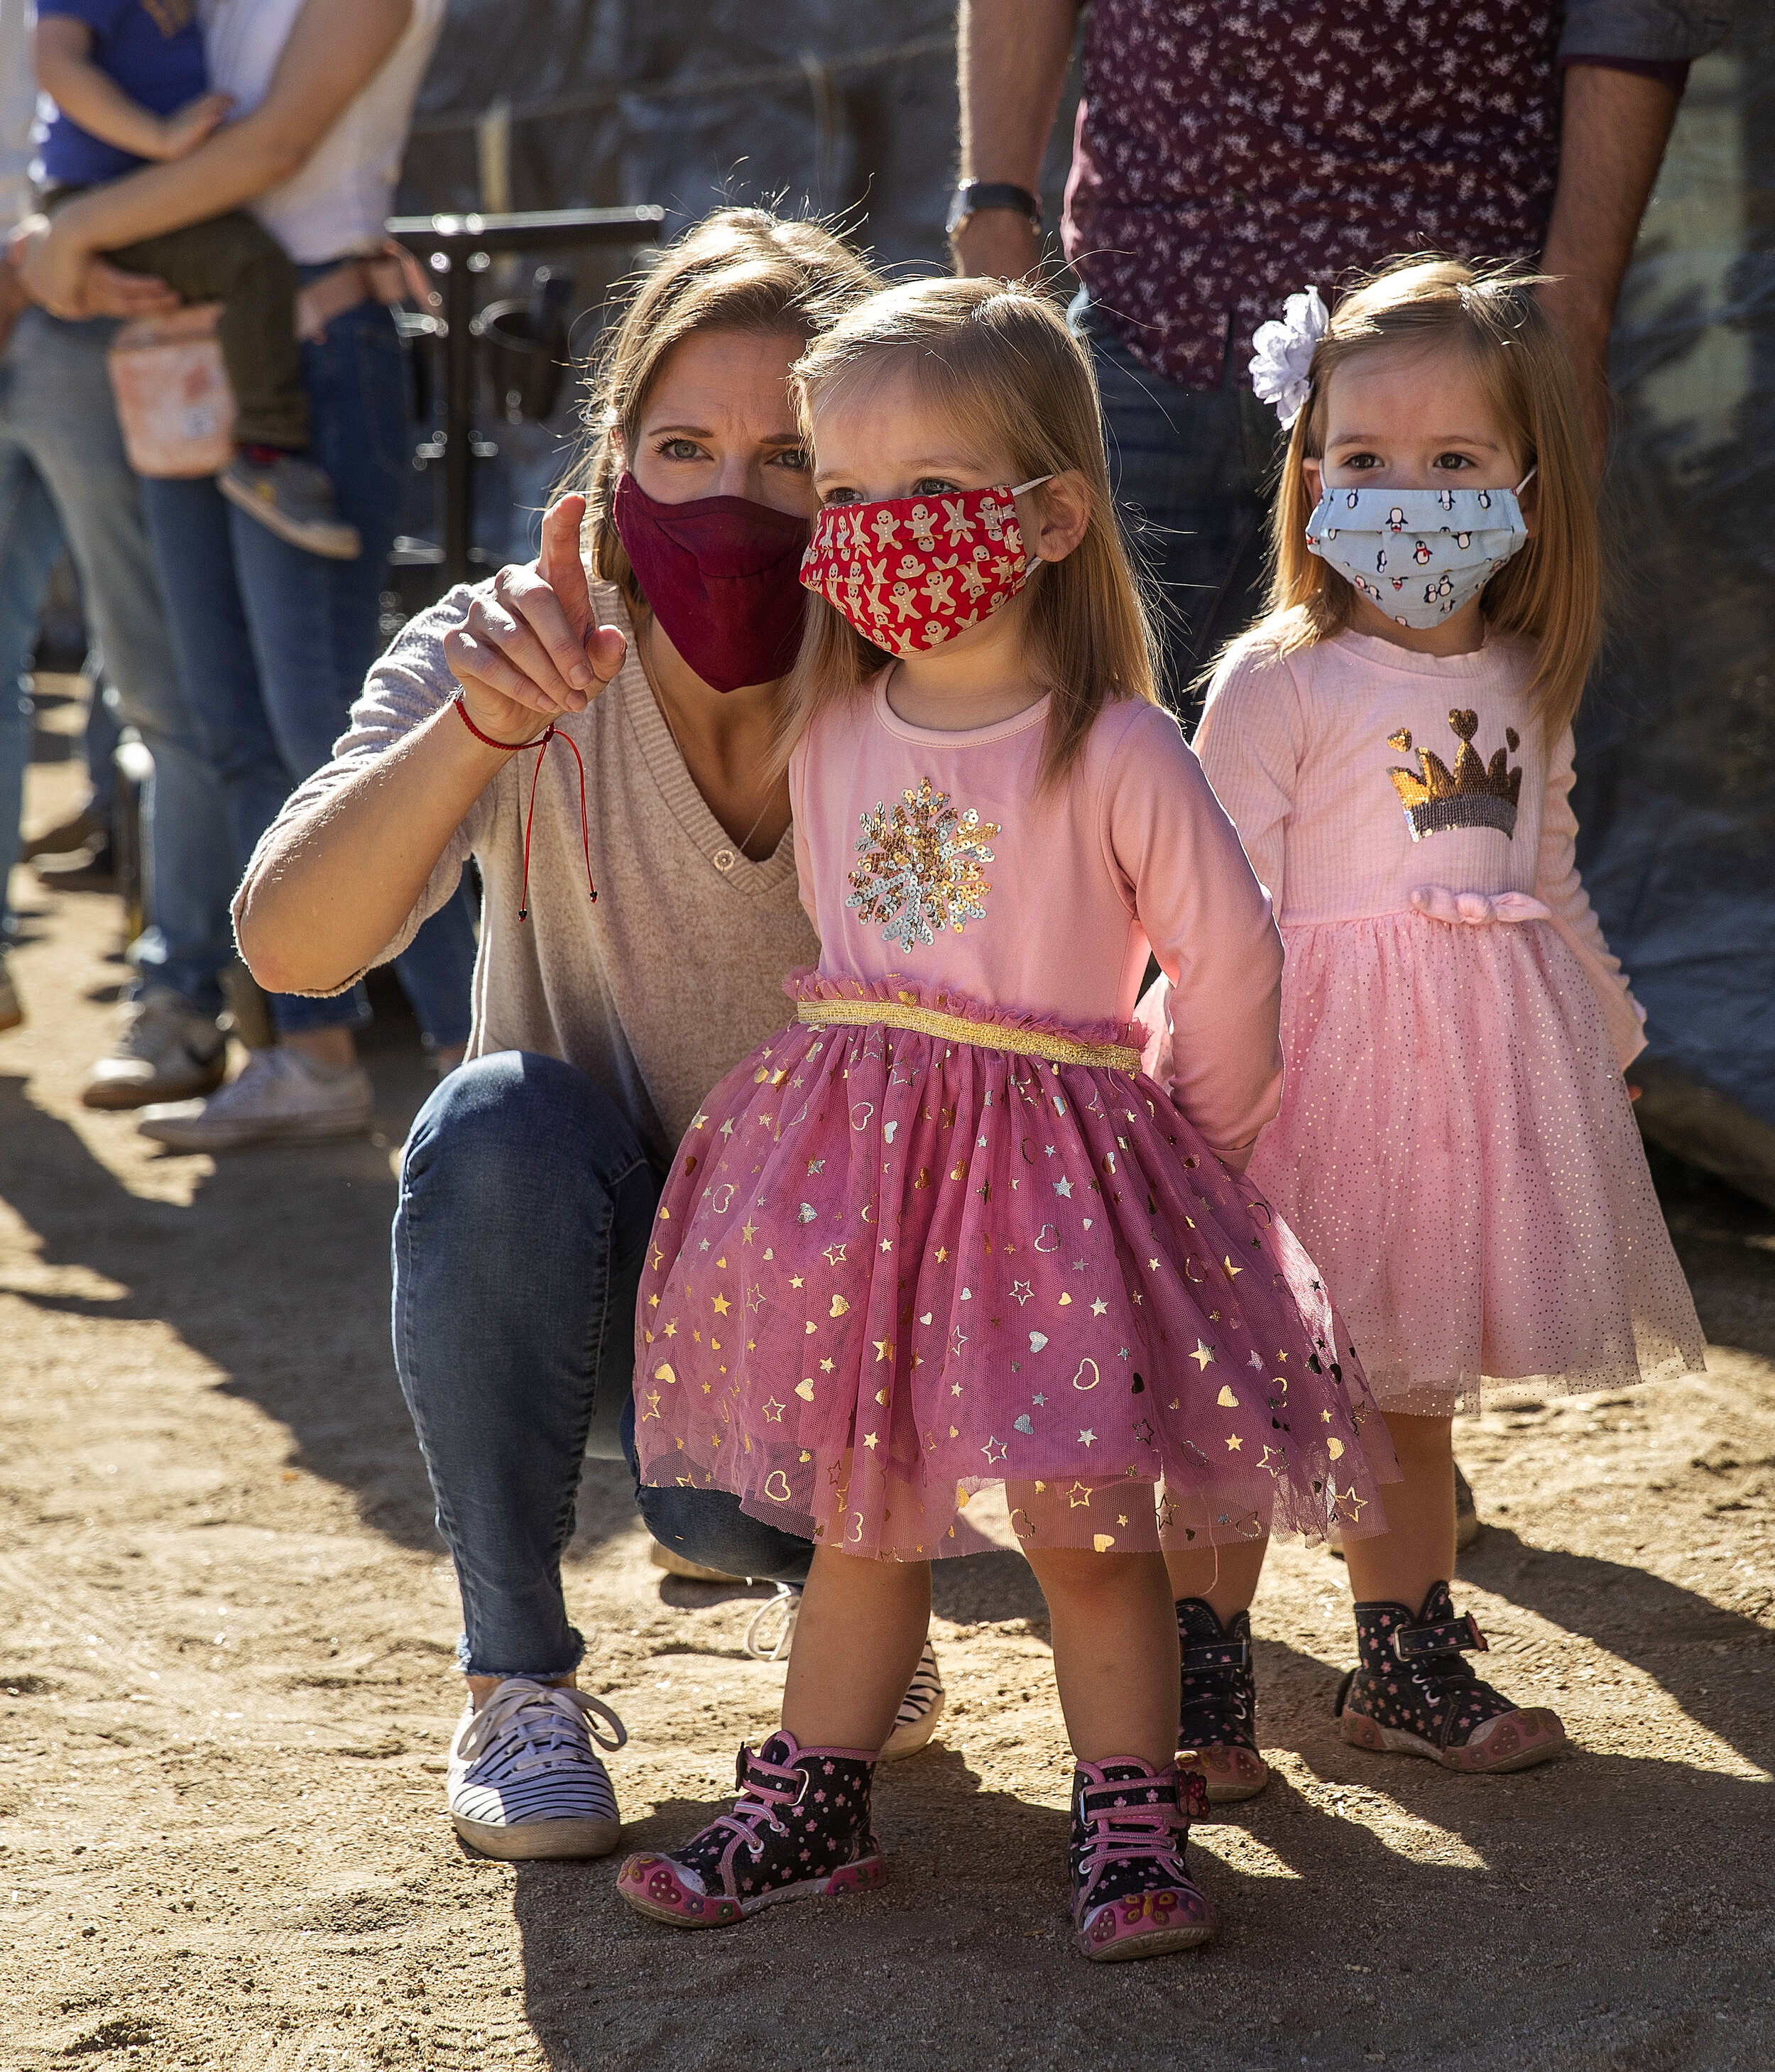  MOORPARK, CA - DECEMBER 05, 2020: Wearing protective masks against the coronavirus, Kristen Vazquez of Los Angeles points out Santa Claus to her 2 year old twin daughters, Zoe Vazquez, center, and Stella, during a visit to Underwood Family Farms in 